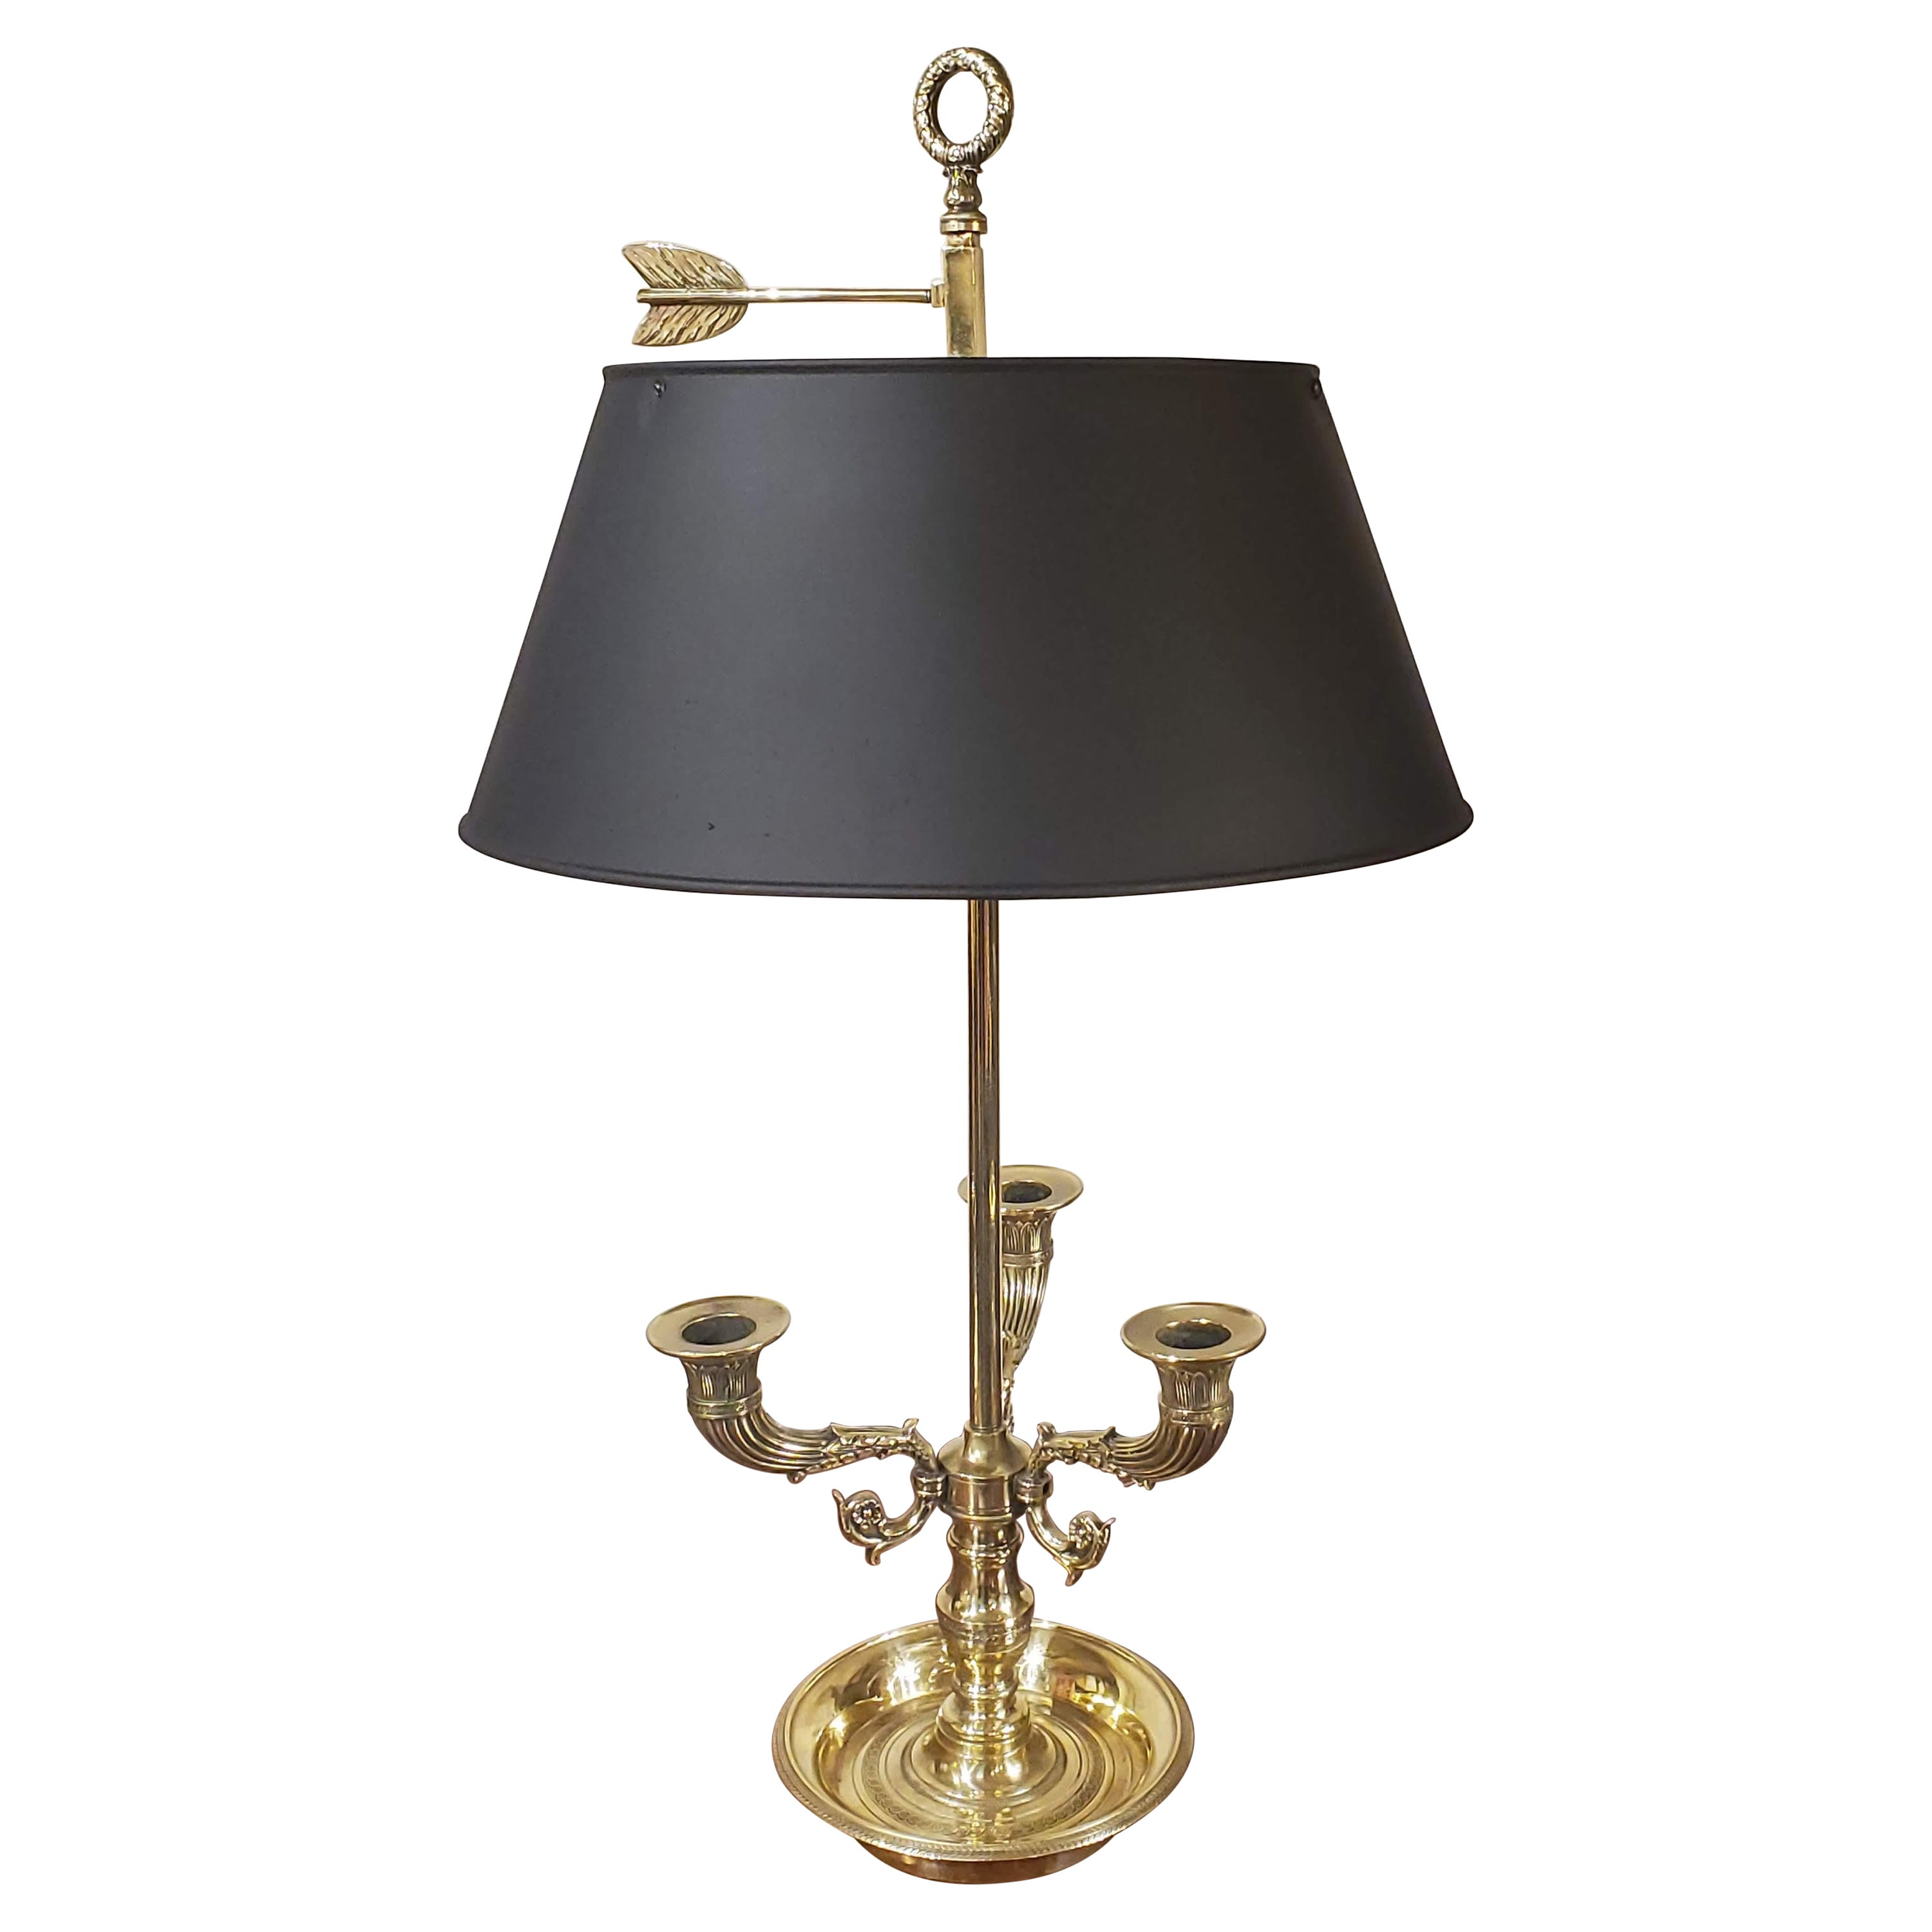 Early 19th Century French Provincial Brass Bouillotte Lamp with Black Oval Shade